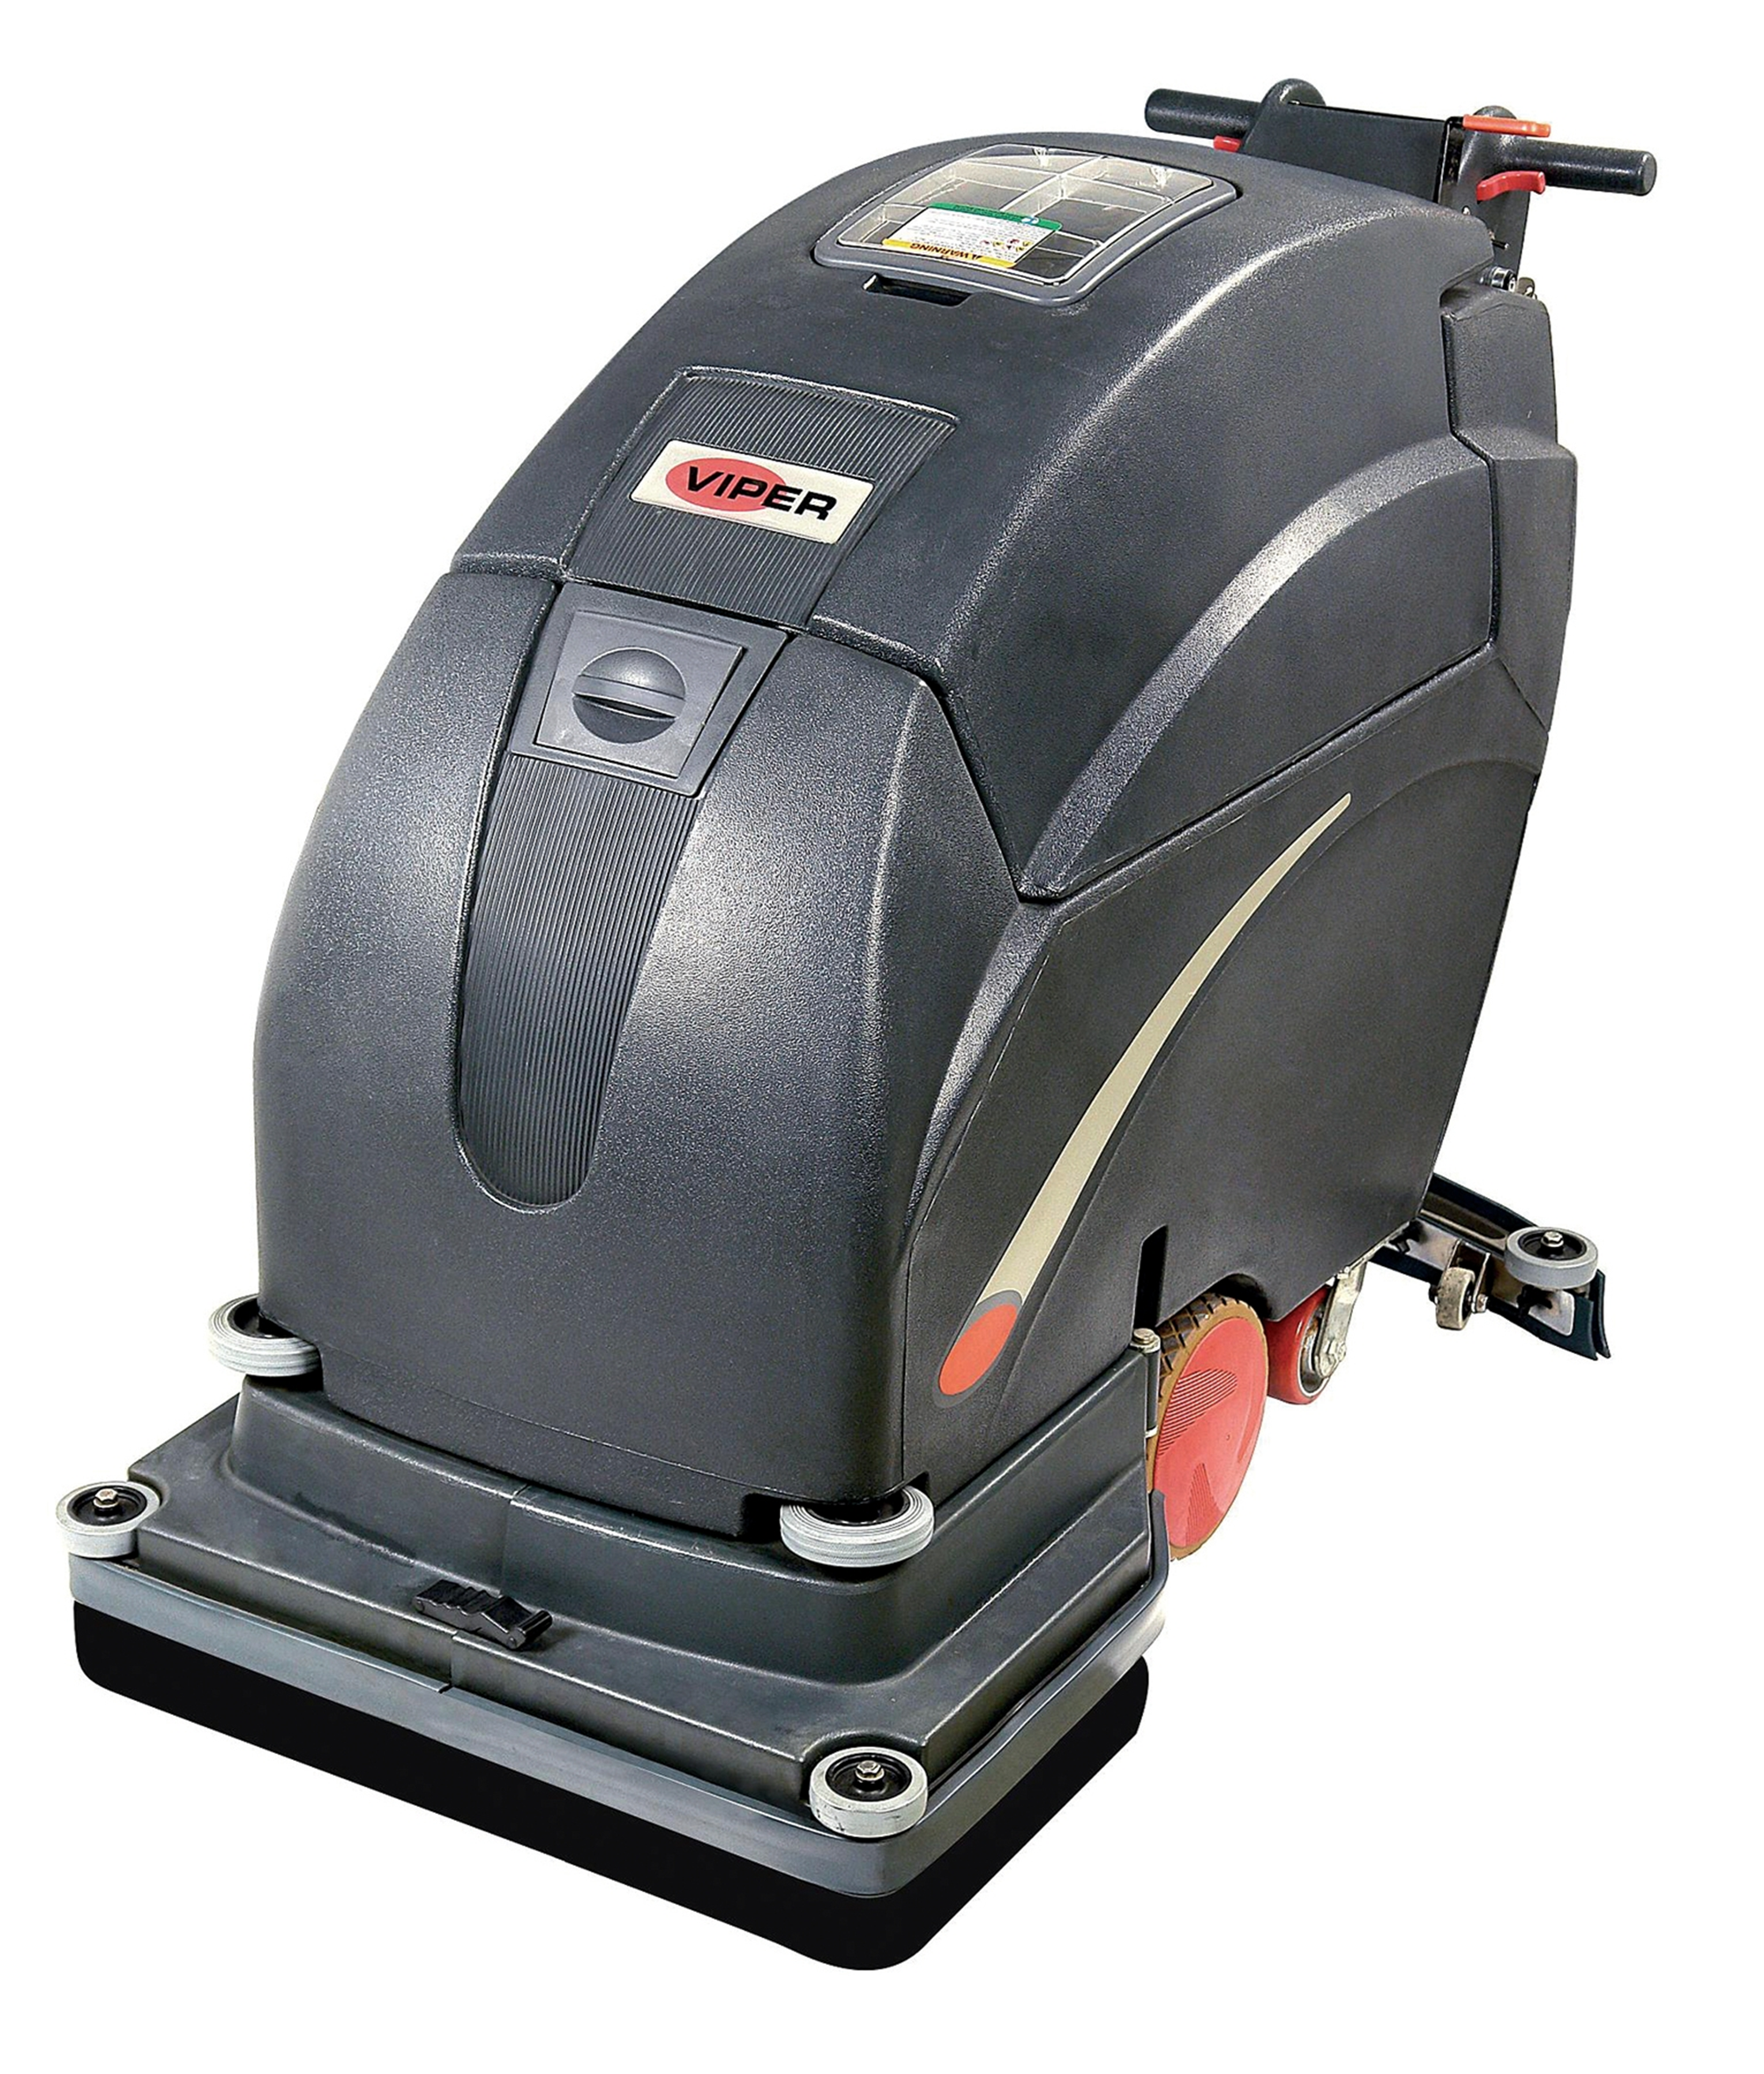 FANG 28 AUTOMATIC SCRUBBER W | Nilfisk Official Website